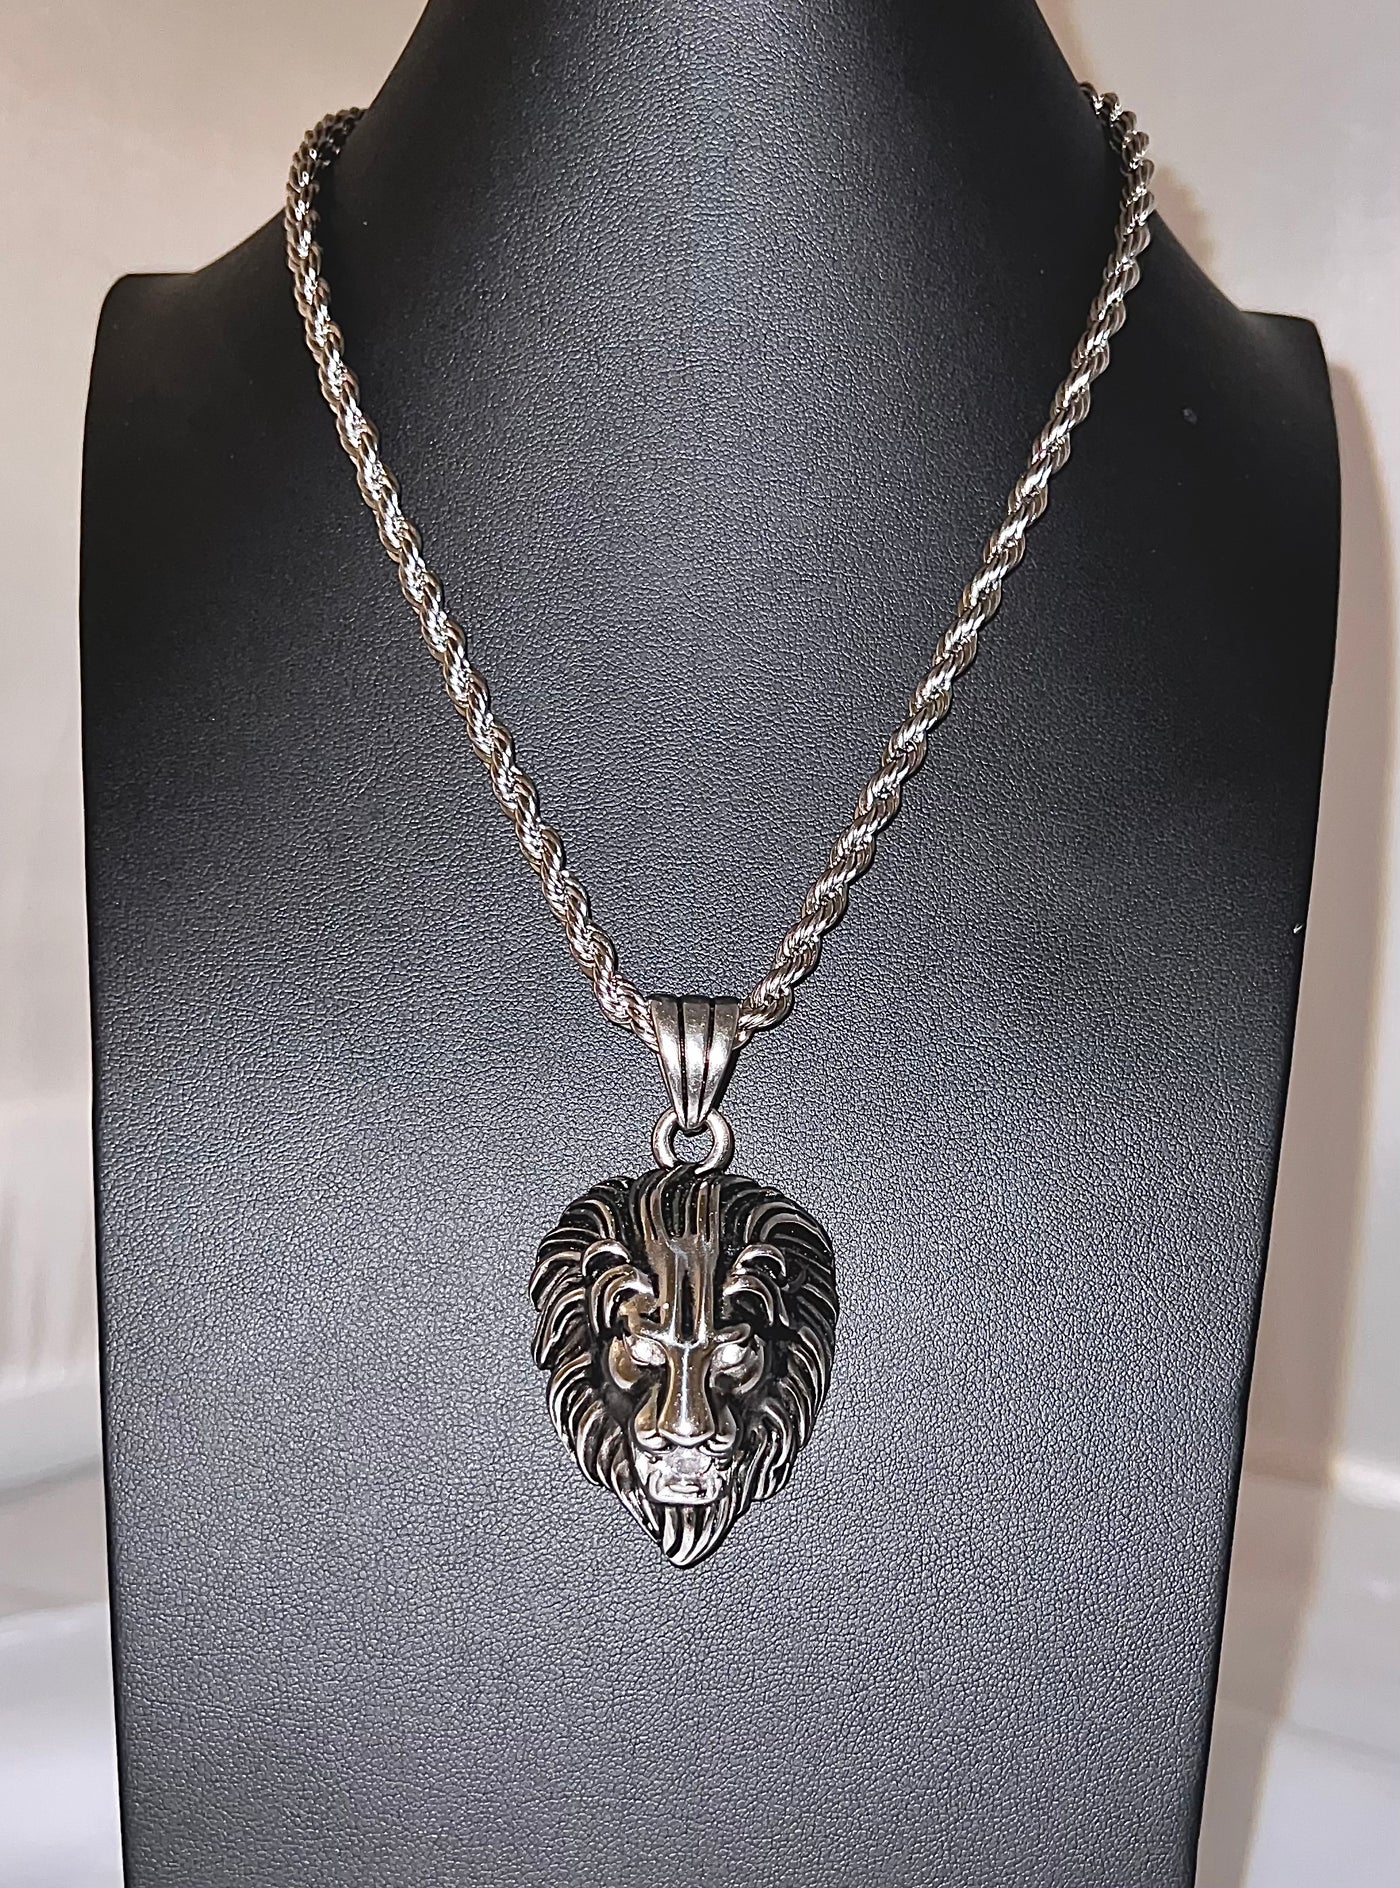 Silver Lion necklace and pendant made of stainless steel - Brent's Bling